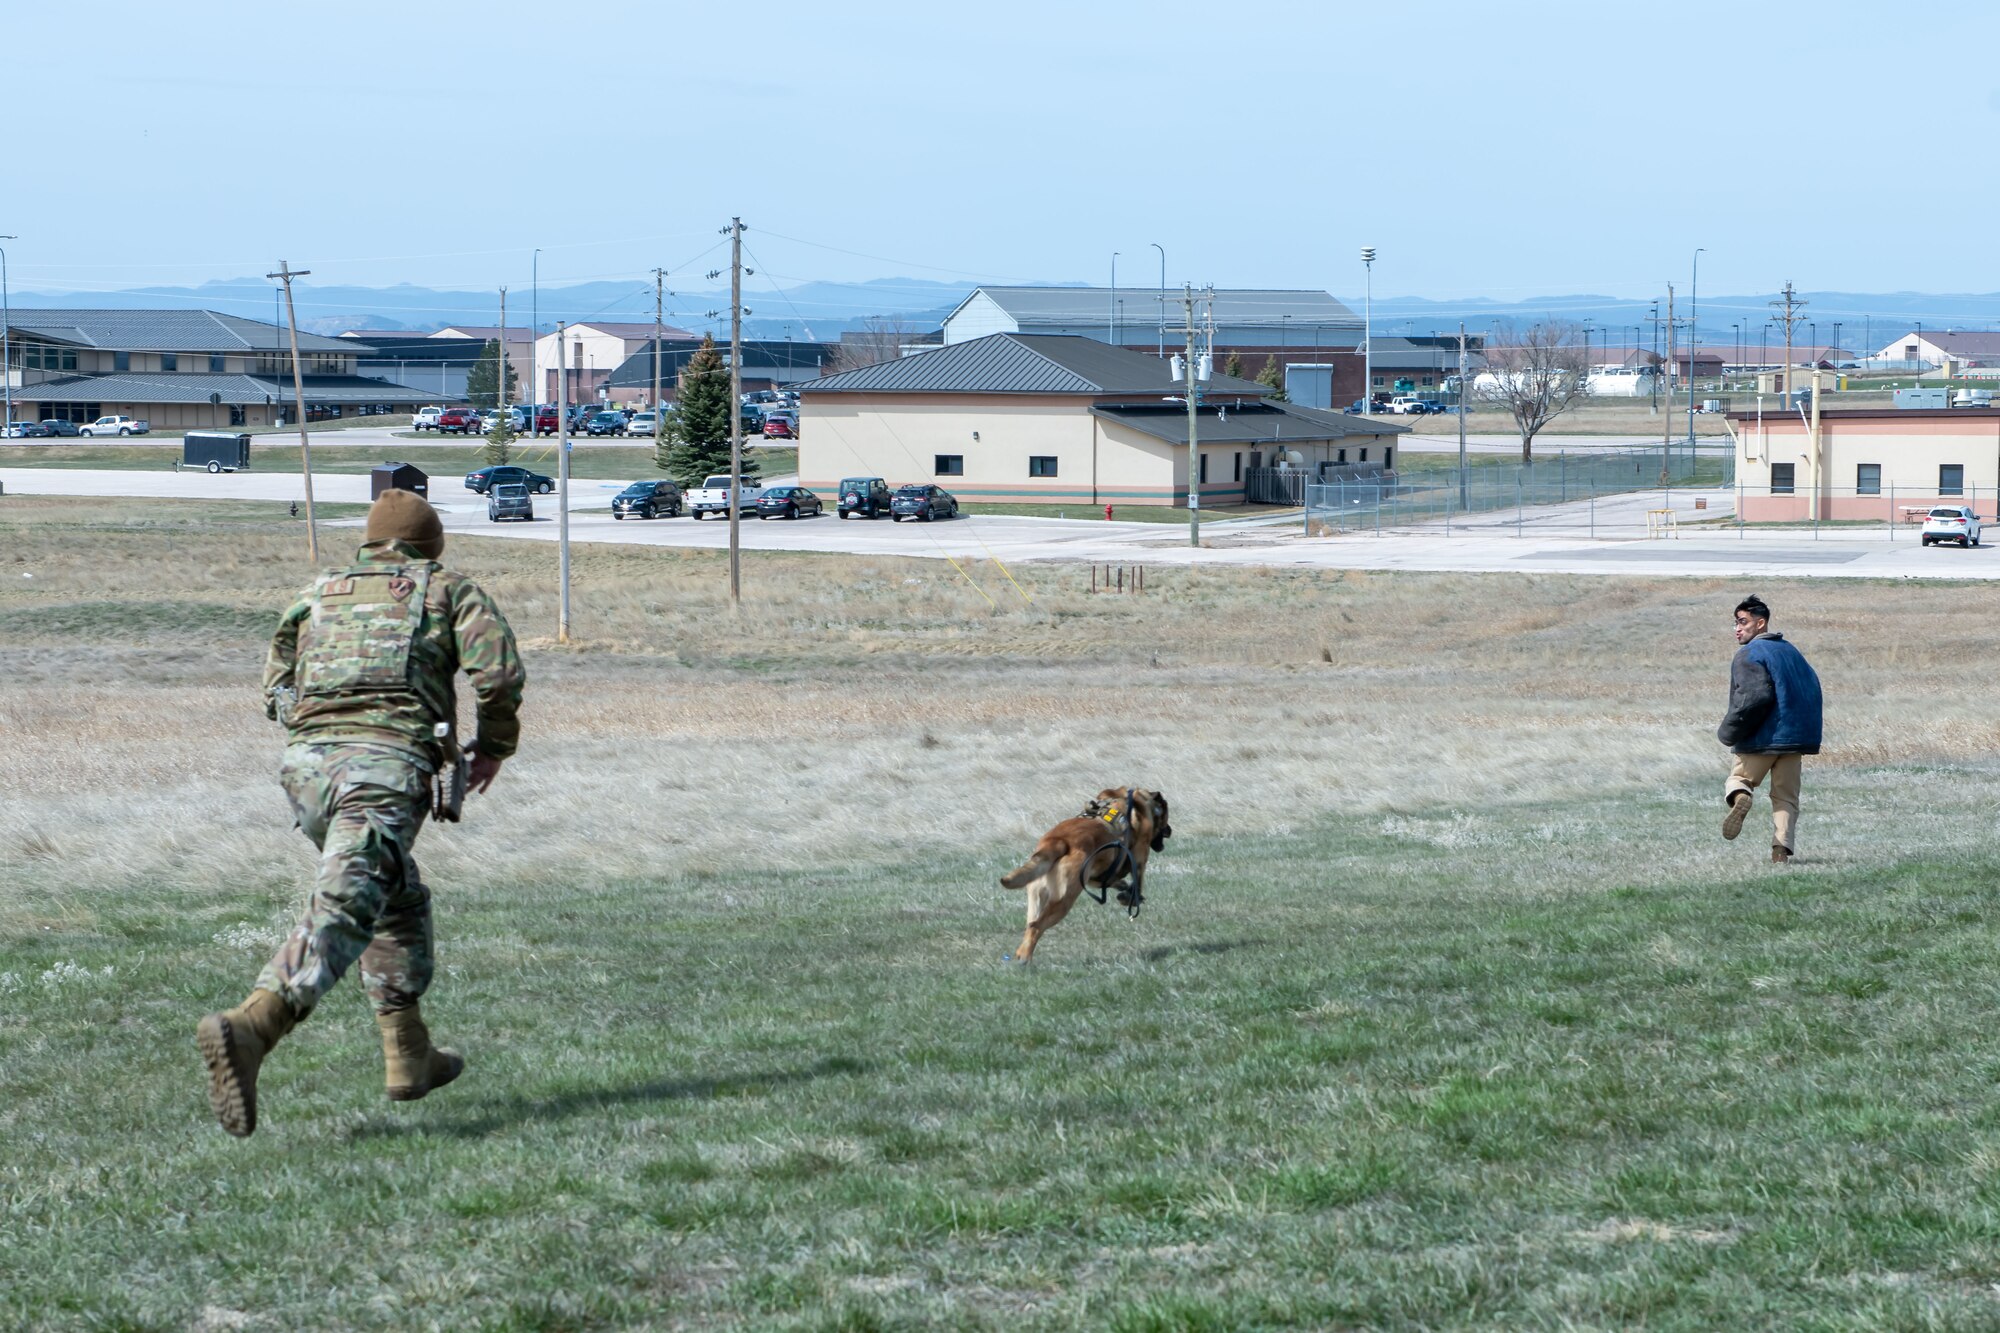 Airmen with the 28th Security Forces Squadron K-9 unit demonstrate procedures for apprehending a suspect at Ellsworth Air Force Base, S.D., April 19, 2022. Security Forces performed these procedures as an educational show for the Douglas High School Air Force Junior Reserve Officer Training Corps. (U.S. Air Force photo by Airman 1st Class Adam Olson)